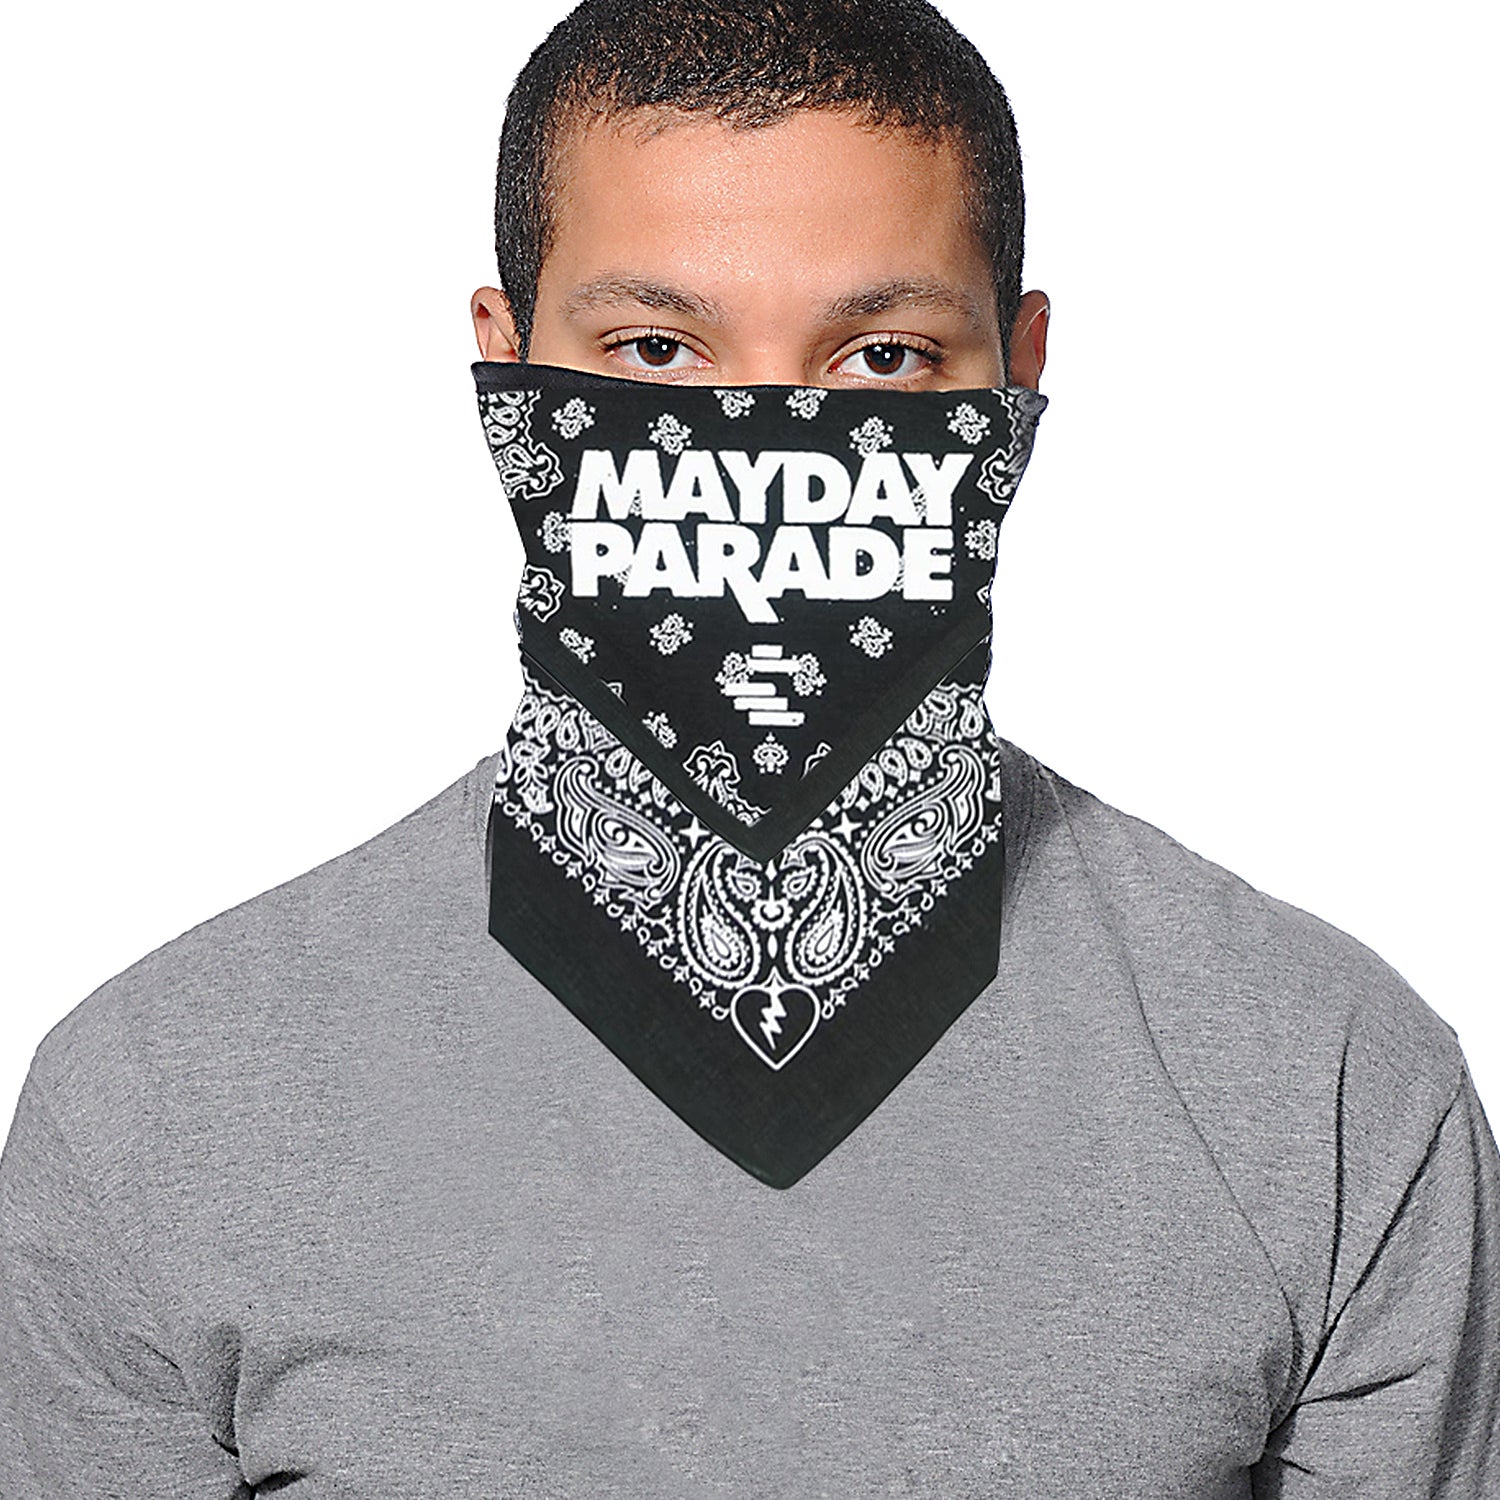 image of a man with short dark hair and a grey tee shirt wearing a black bandana wrapped around his face on a white background. the bandana is black with white print of paisley patterns and mayday parade in the center